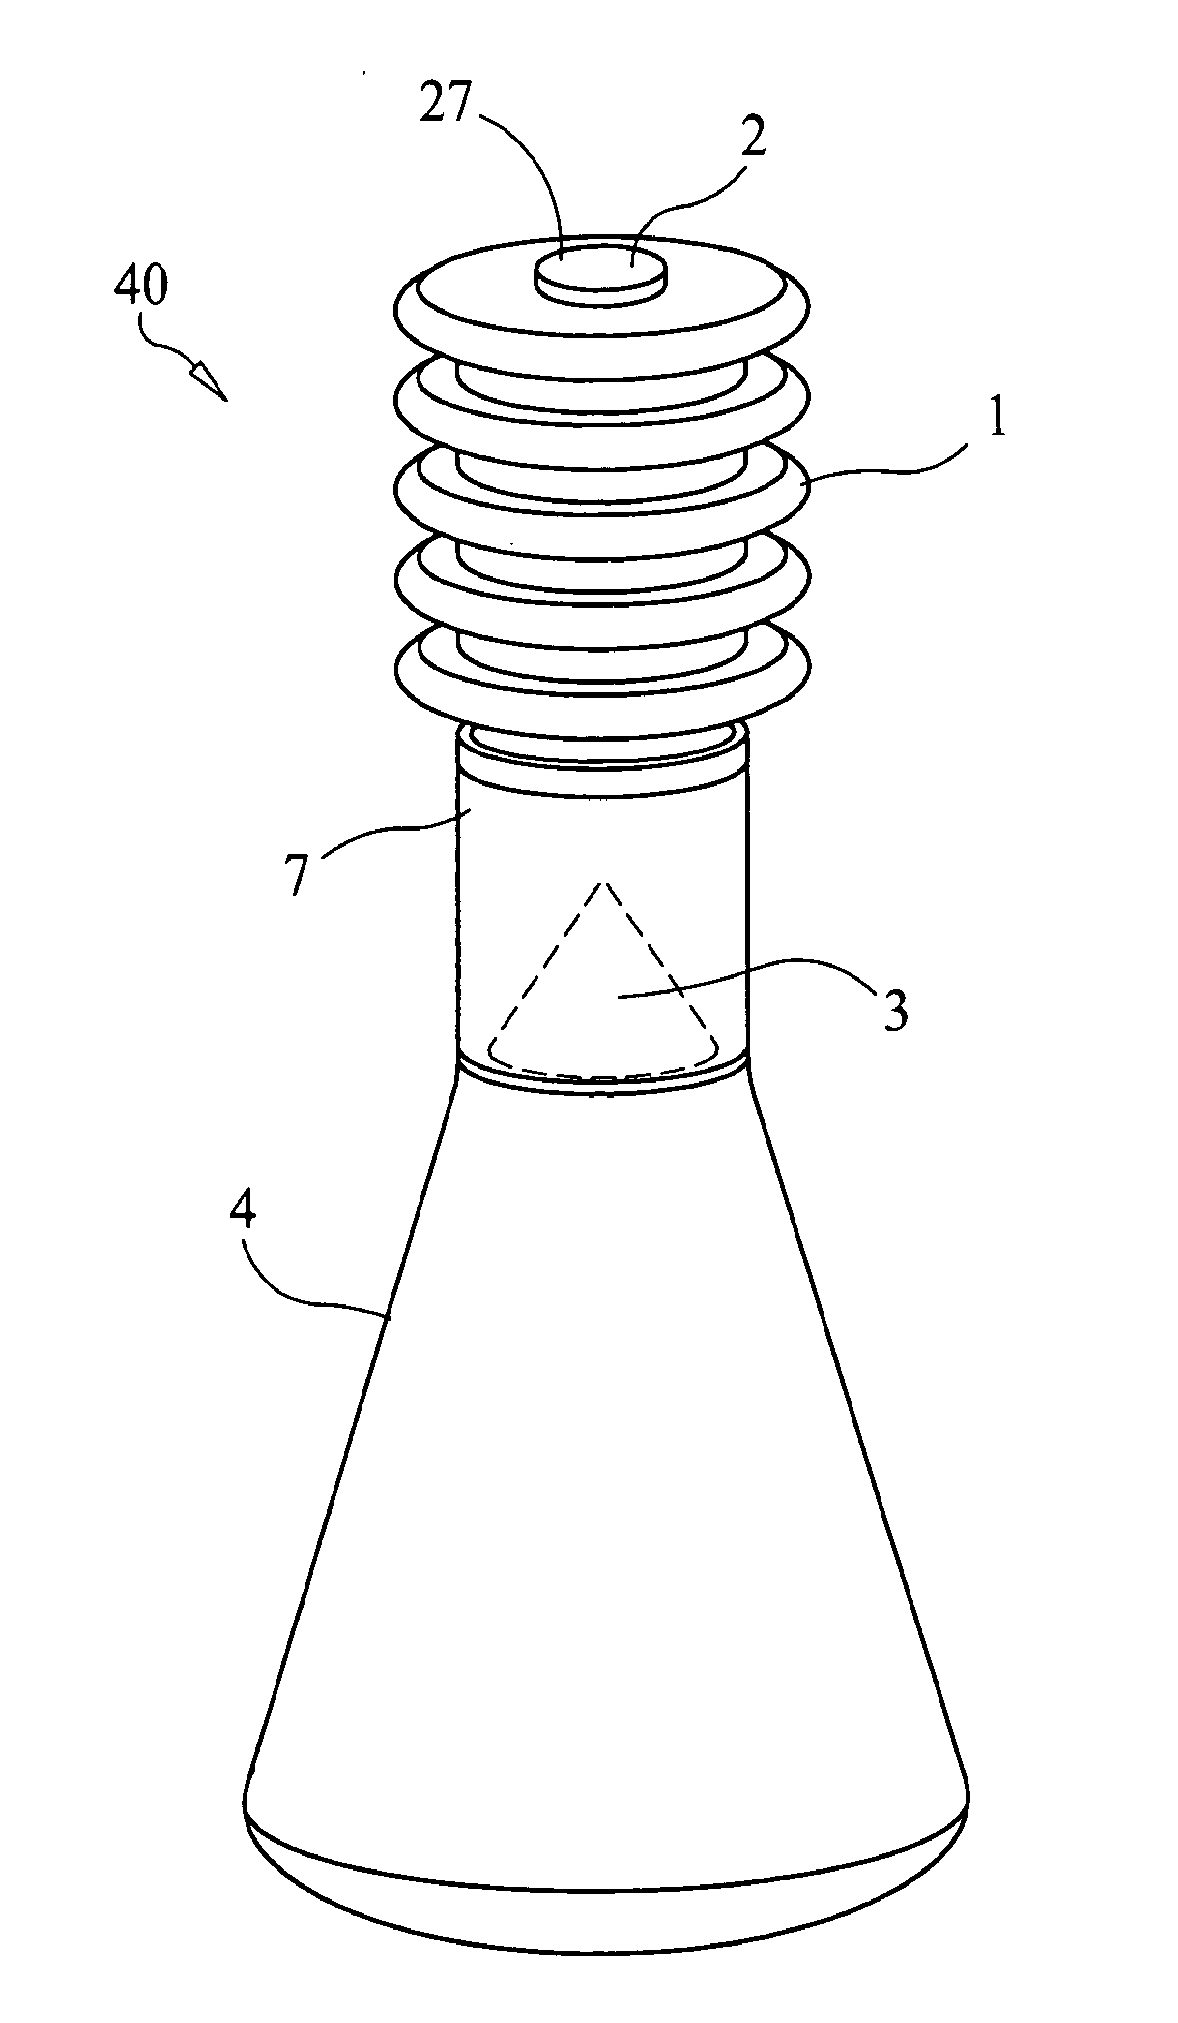 Self-contained breathing closure and container